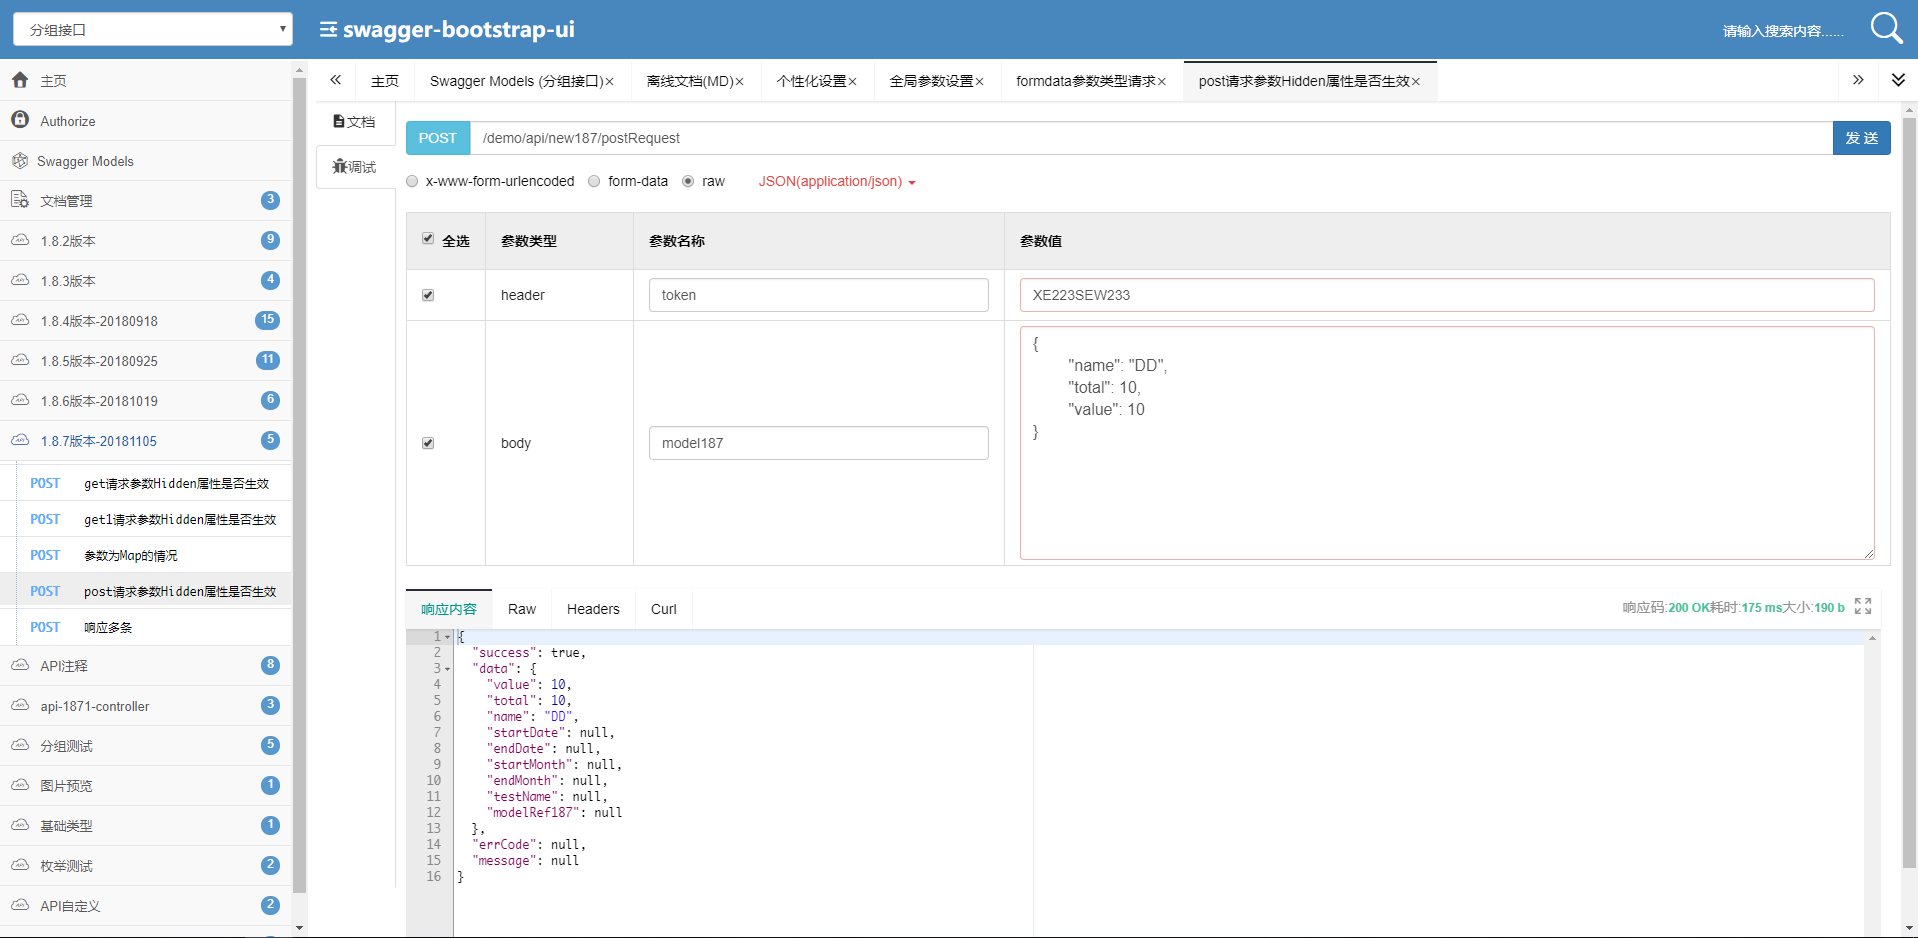 Swagger-Bootstrap-Ui 1.8.7 发布，Swagger增强UI 实现